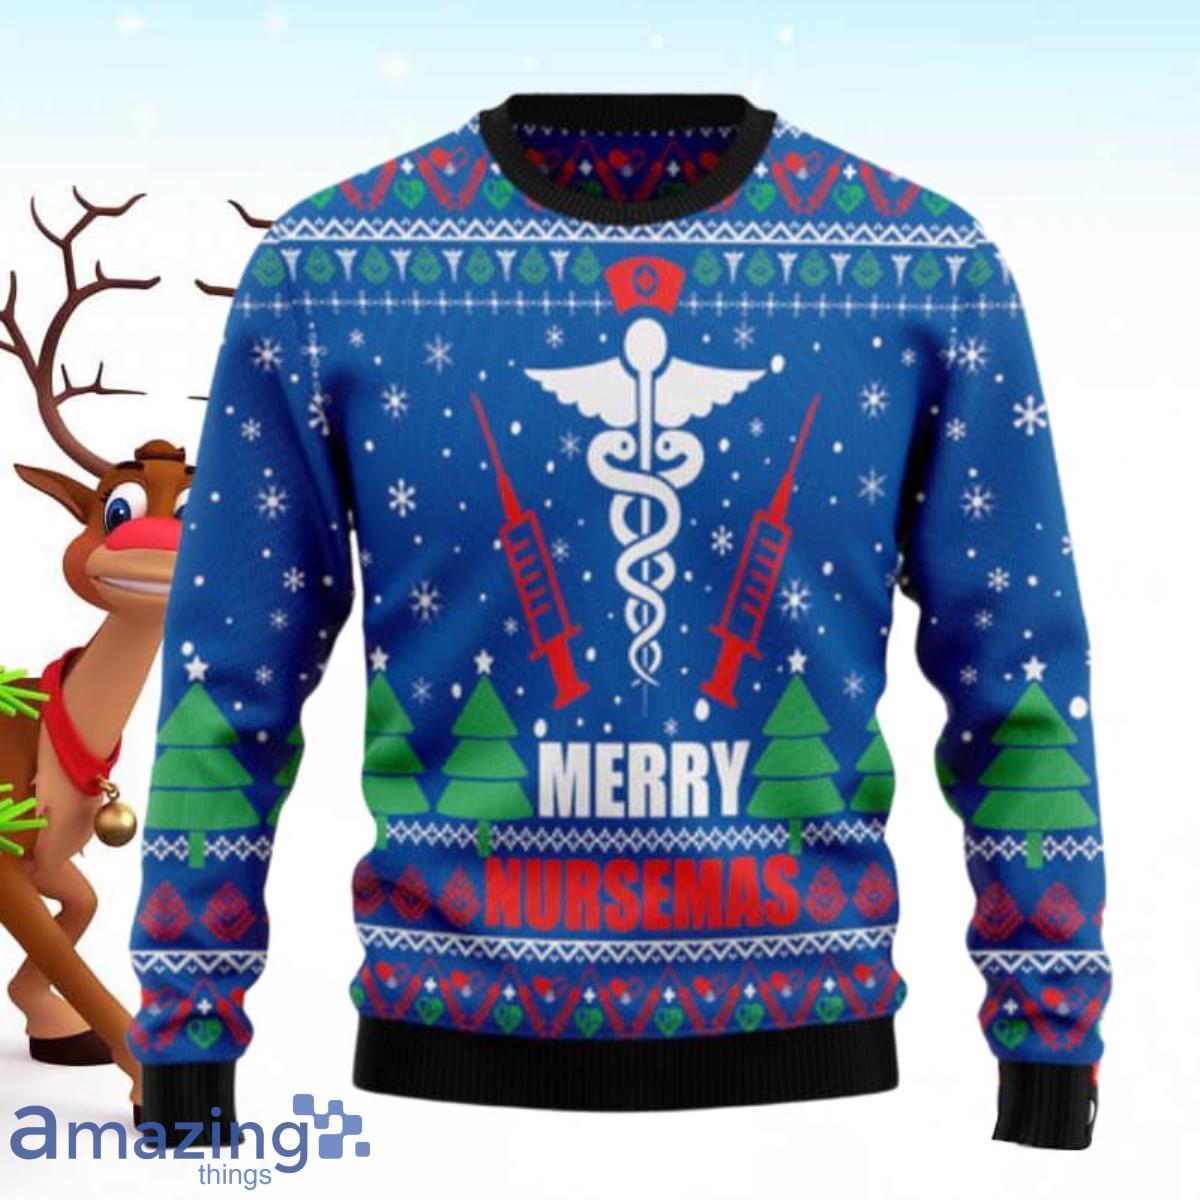 Merry Nursemas Ugly Christmas Sweaters Special Gift For Men And Women Product Photo 1